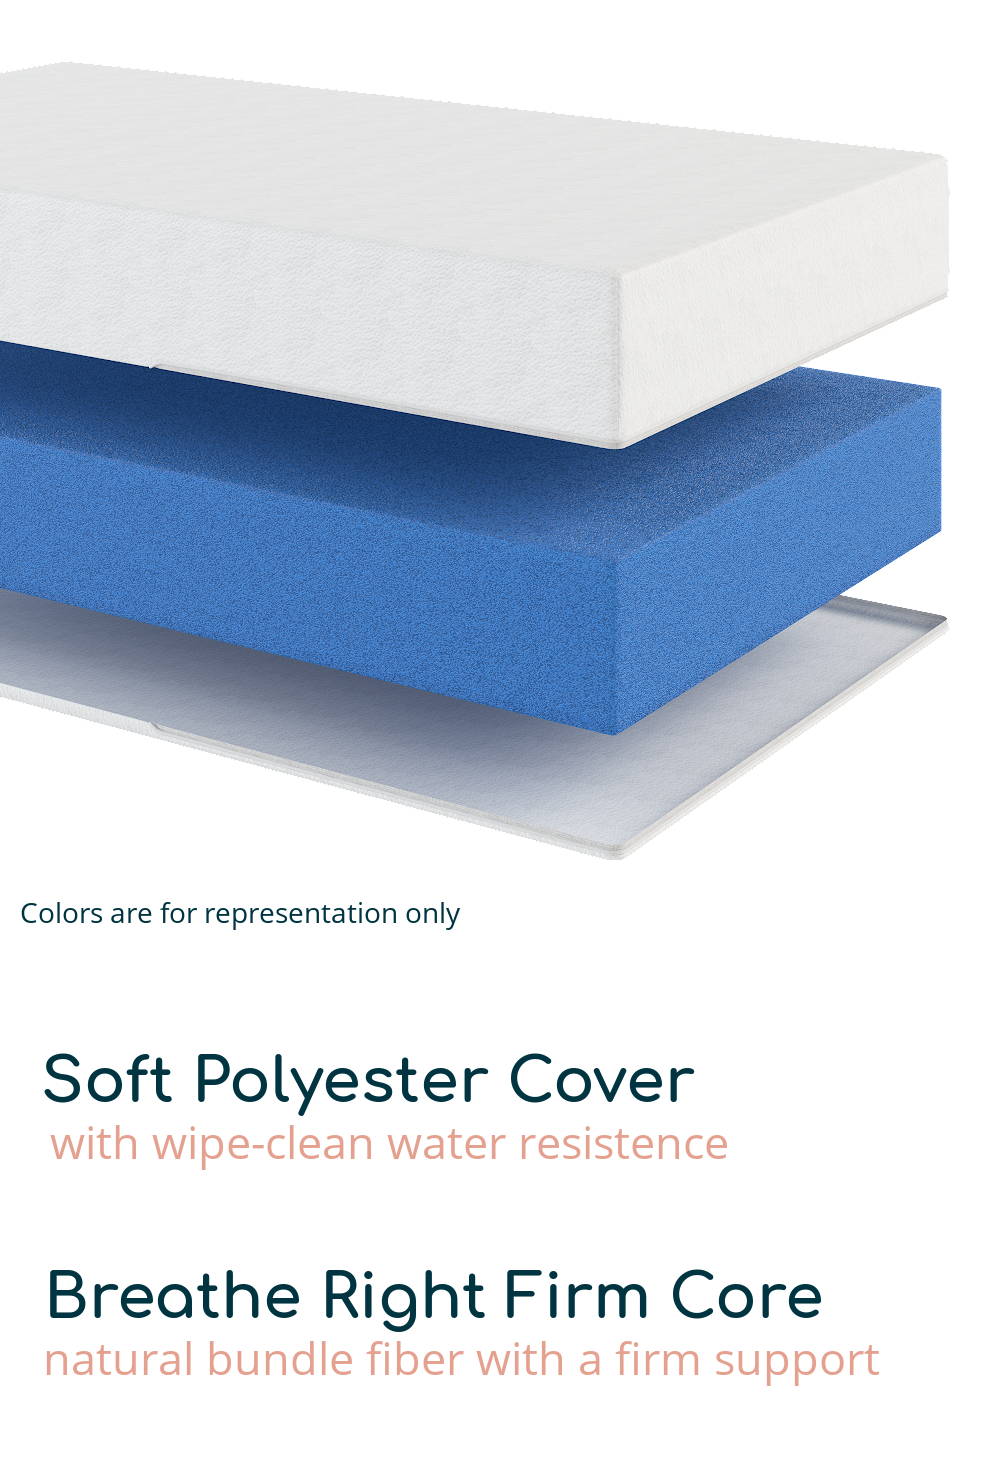 Soft Polyester Cover-with wipe clean resistance and Breathe Right Firm Core-natural bundle fiber with a firm support